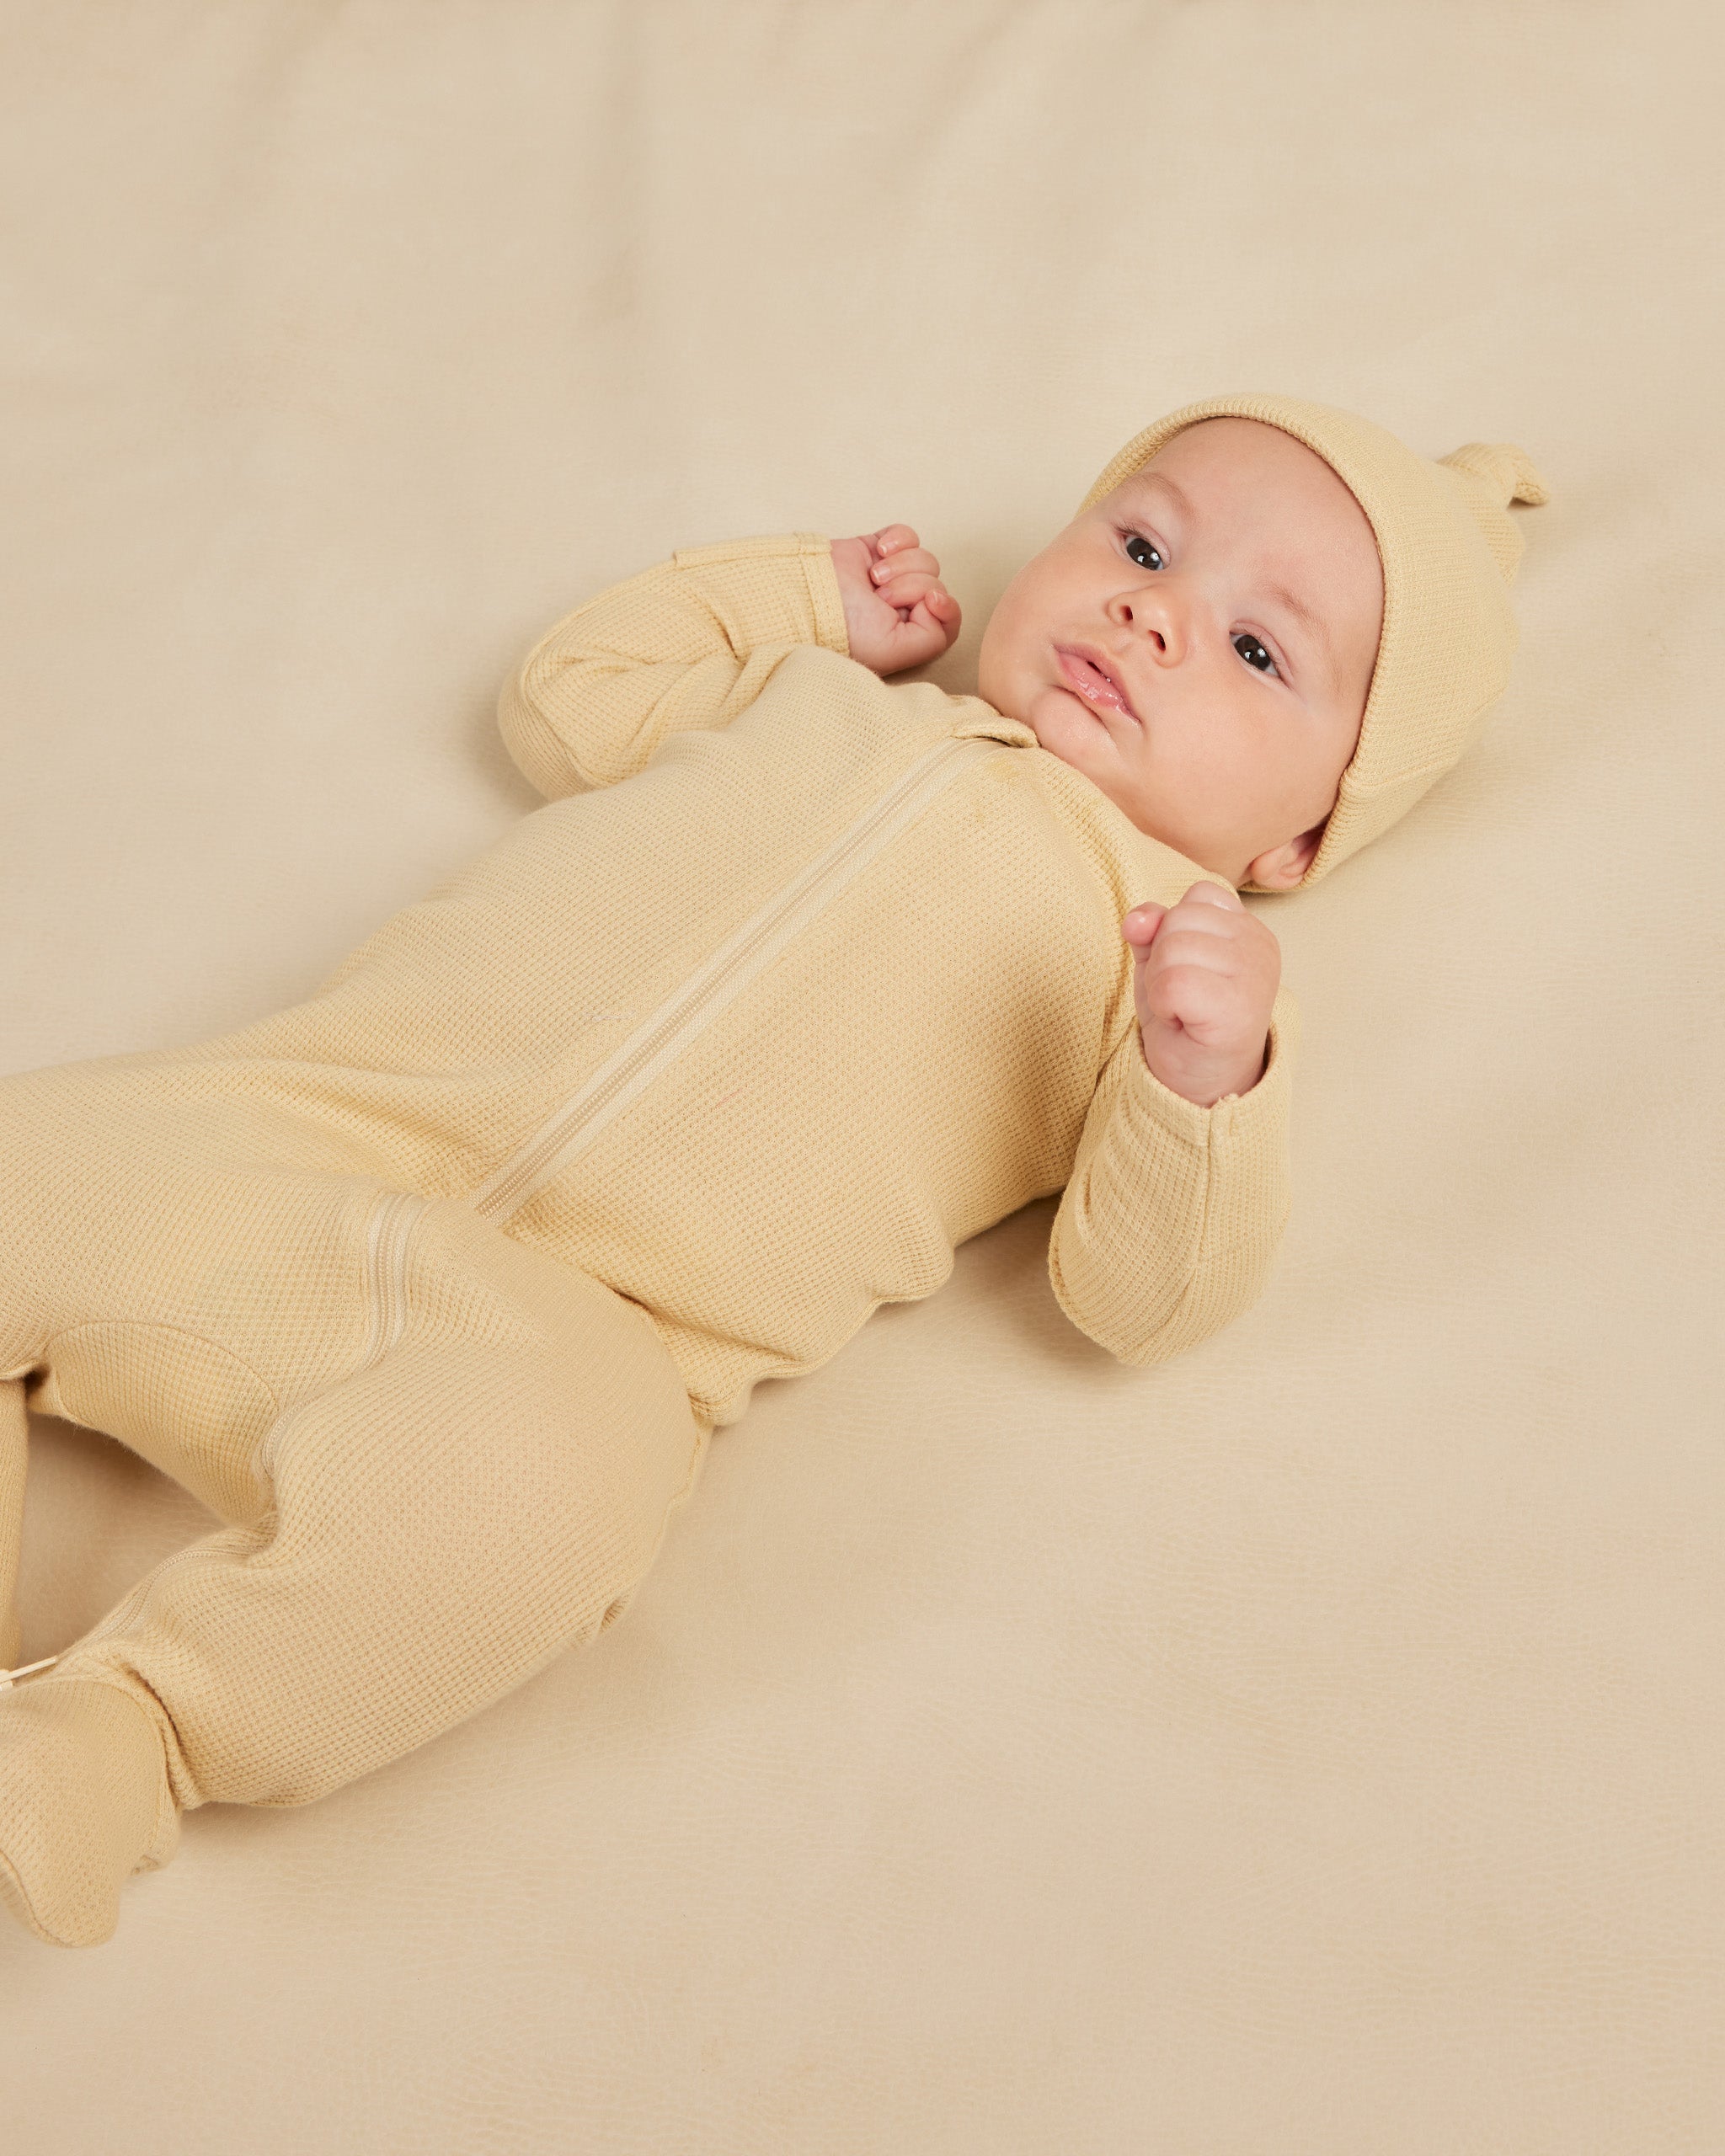 Waffle Zip Footie || Lemon - Rylee + Cru | Kids Clothes | Trendy Baby Clothes | Modern Infant Outfits |